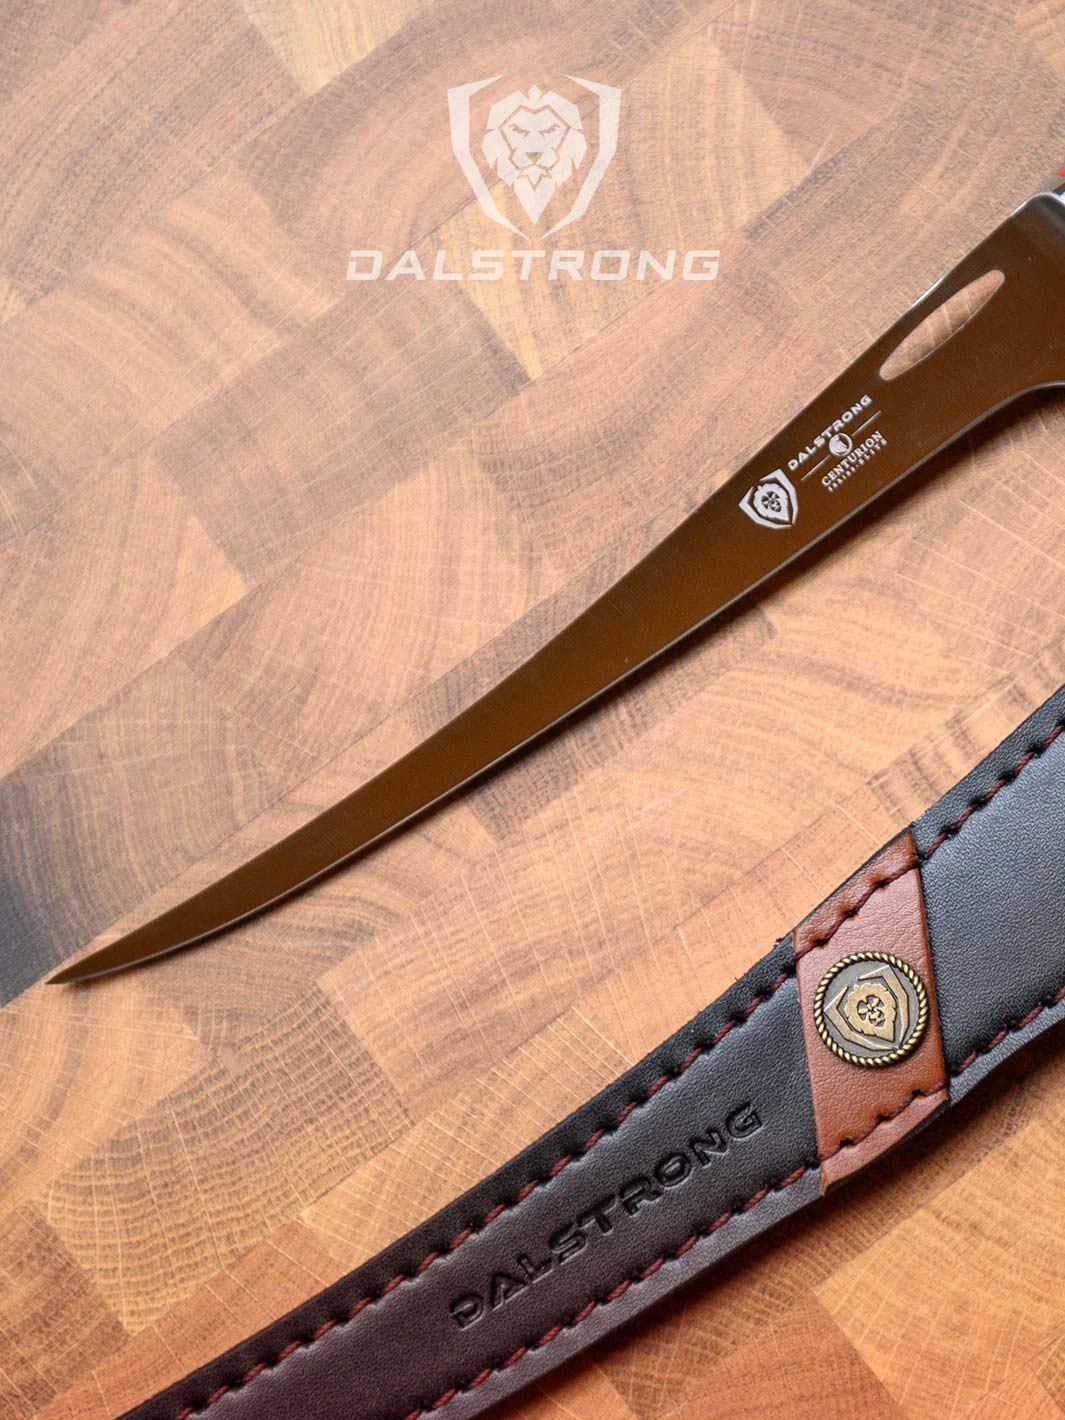 Dalstrong centurion series 7 inch fillet knife with black handle beside it's black sheath.